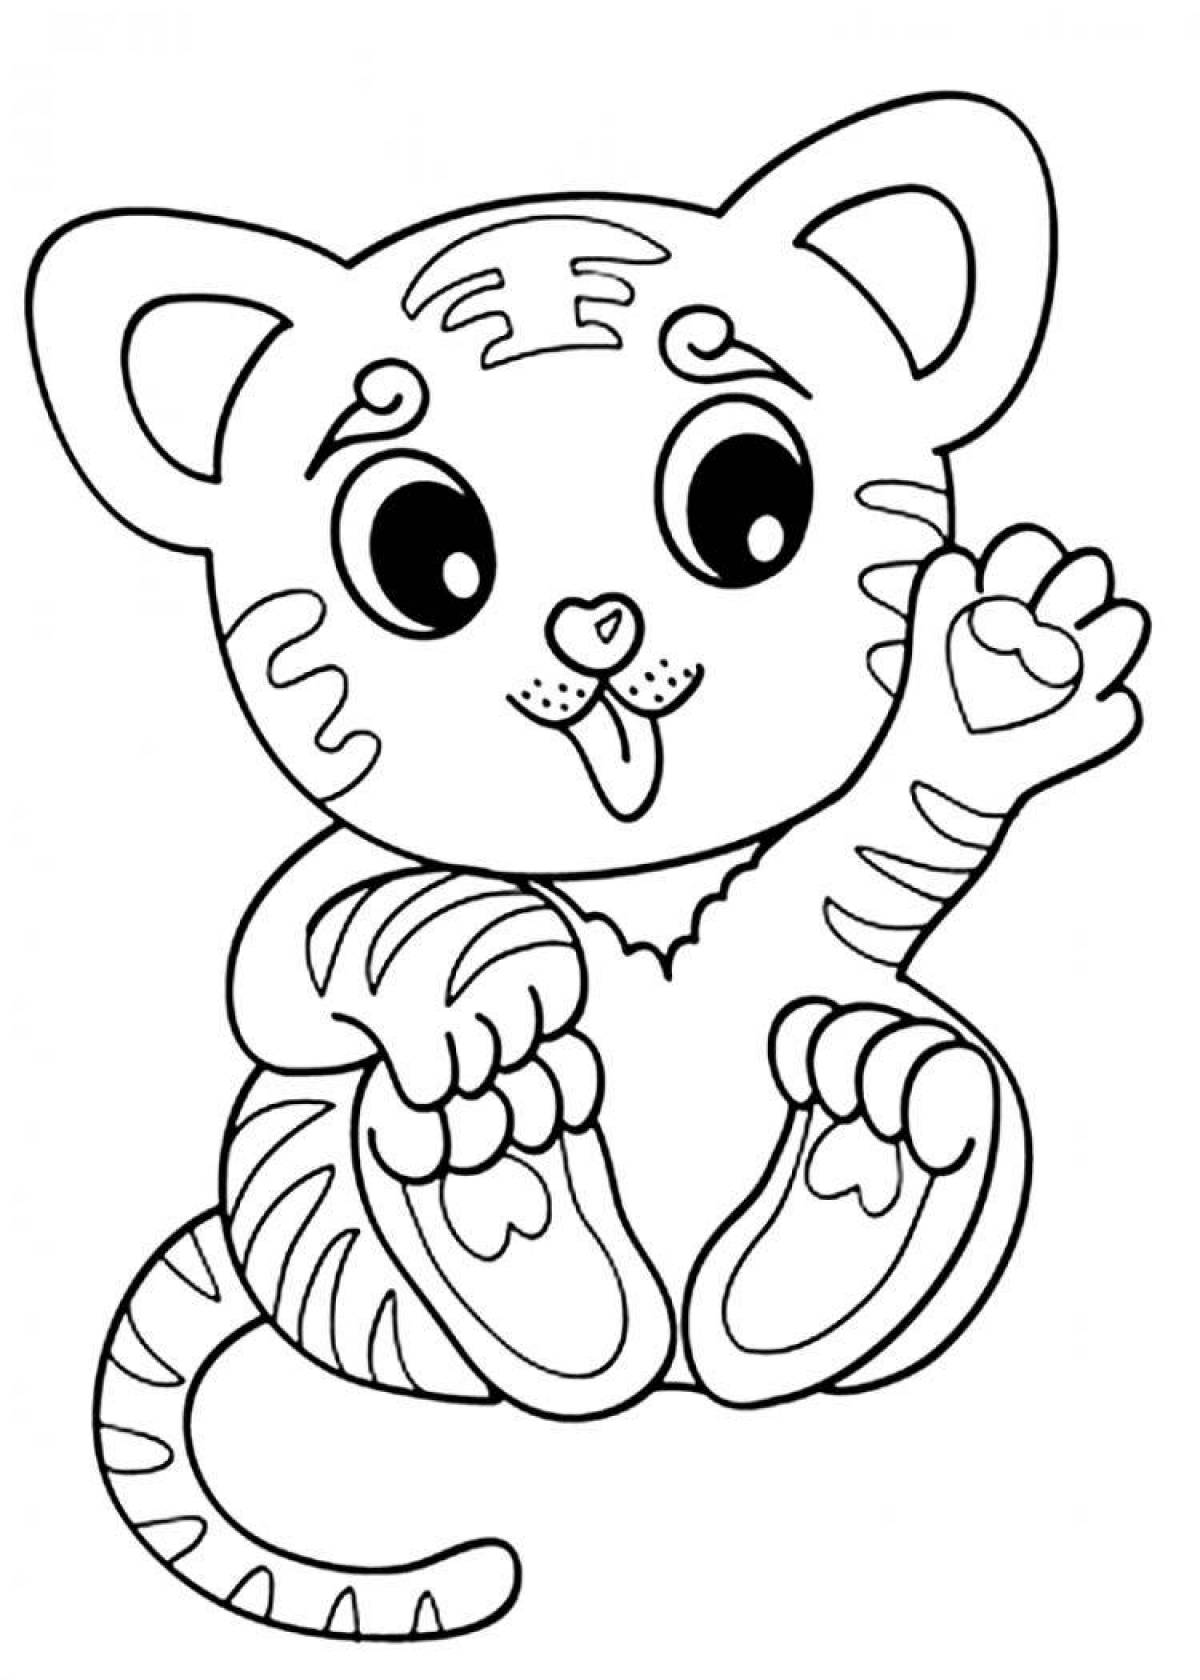 Colorful cute animals coloring book for kids